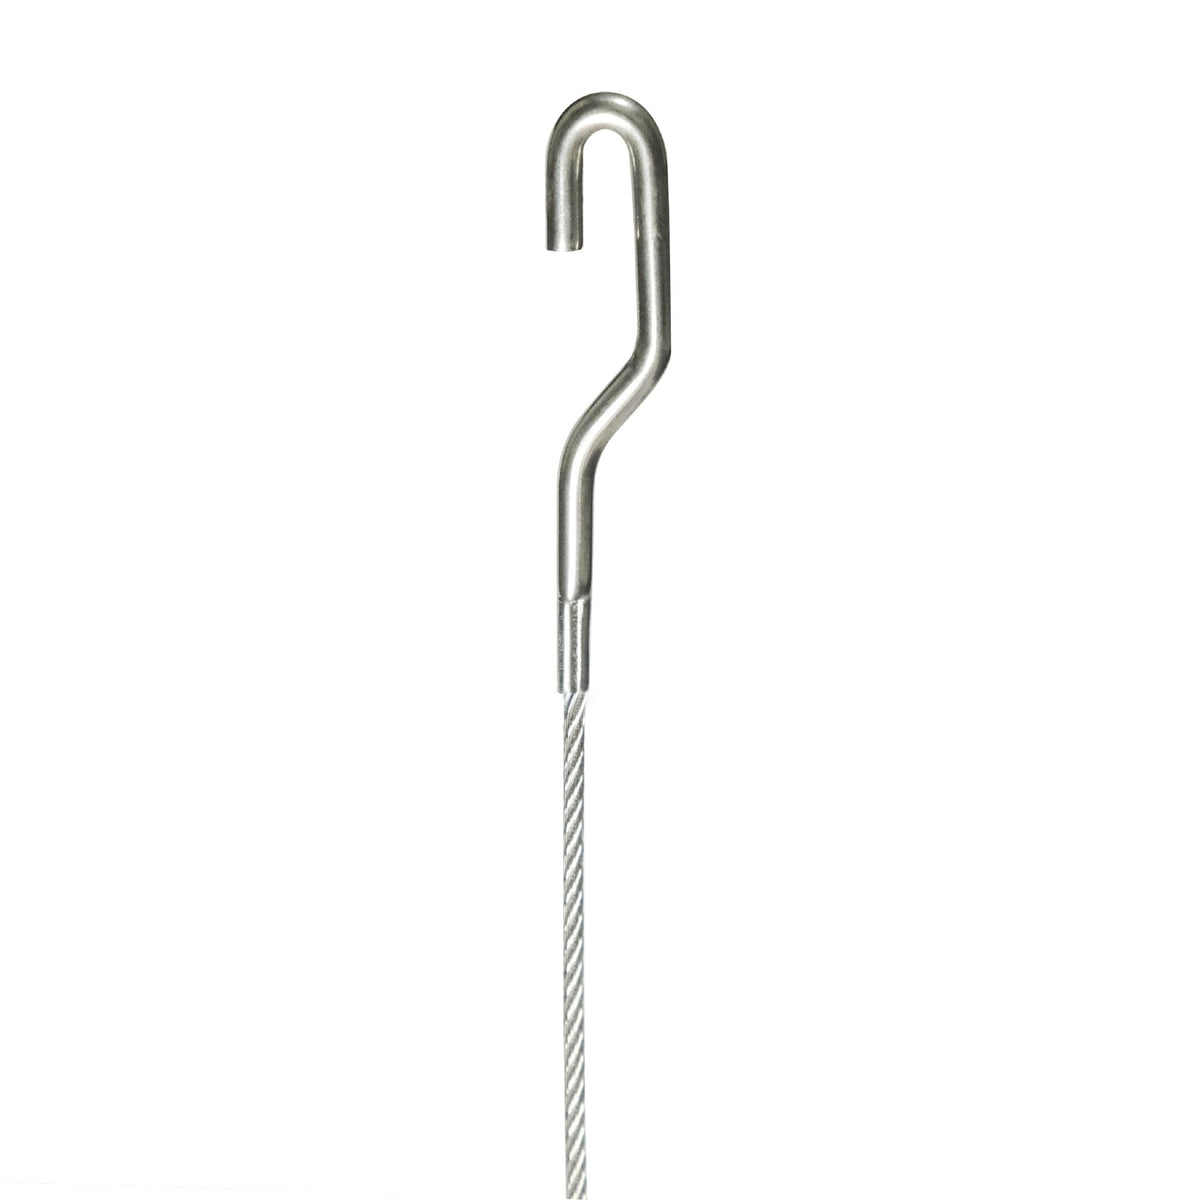 Steel Cord 72-Inch With Large Hook - Q-GSC-S004 - Picture Hang Solutions